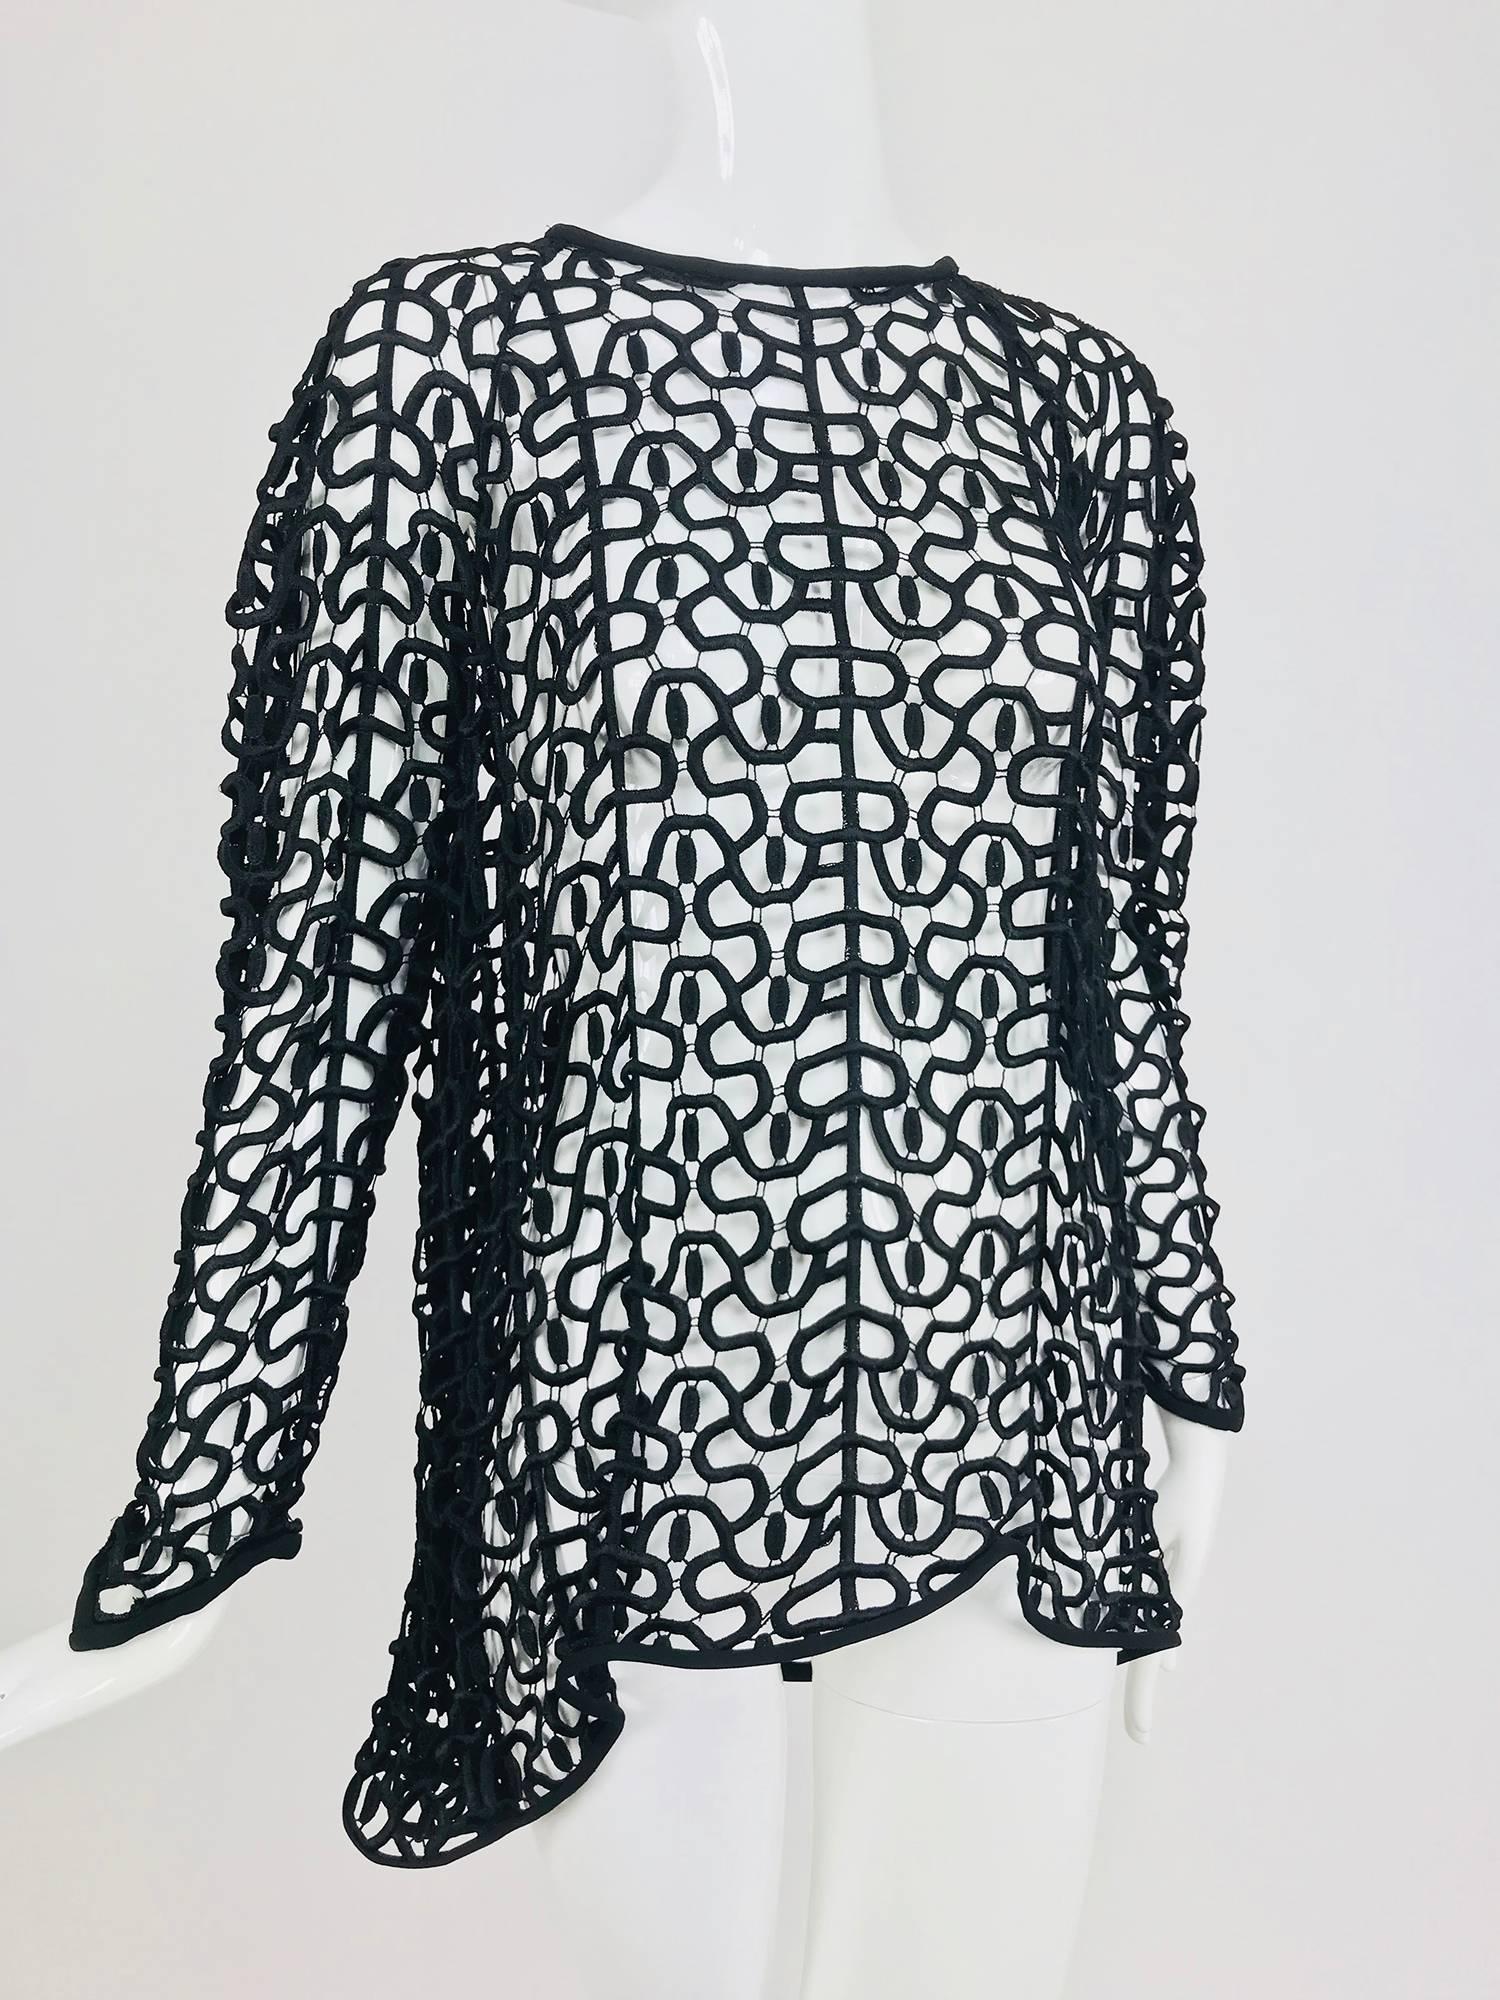 Black open work embroidered top with high low hem...Made like cut work lace of heavily embroidered thread with delicate connector threads facings of black crepe...Well made pull on top has long raglan sleeves that each end in points at the cuffs,